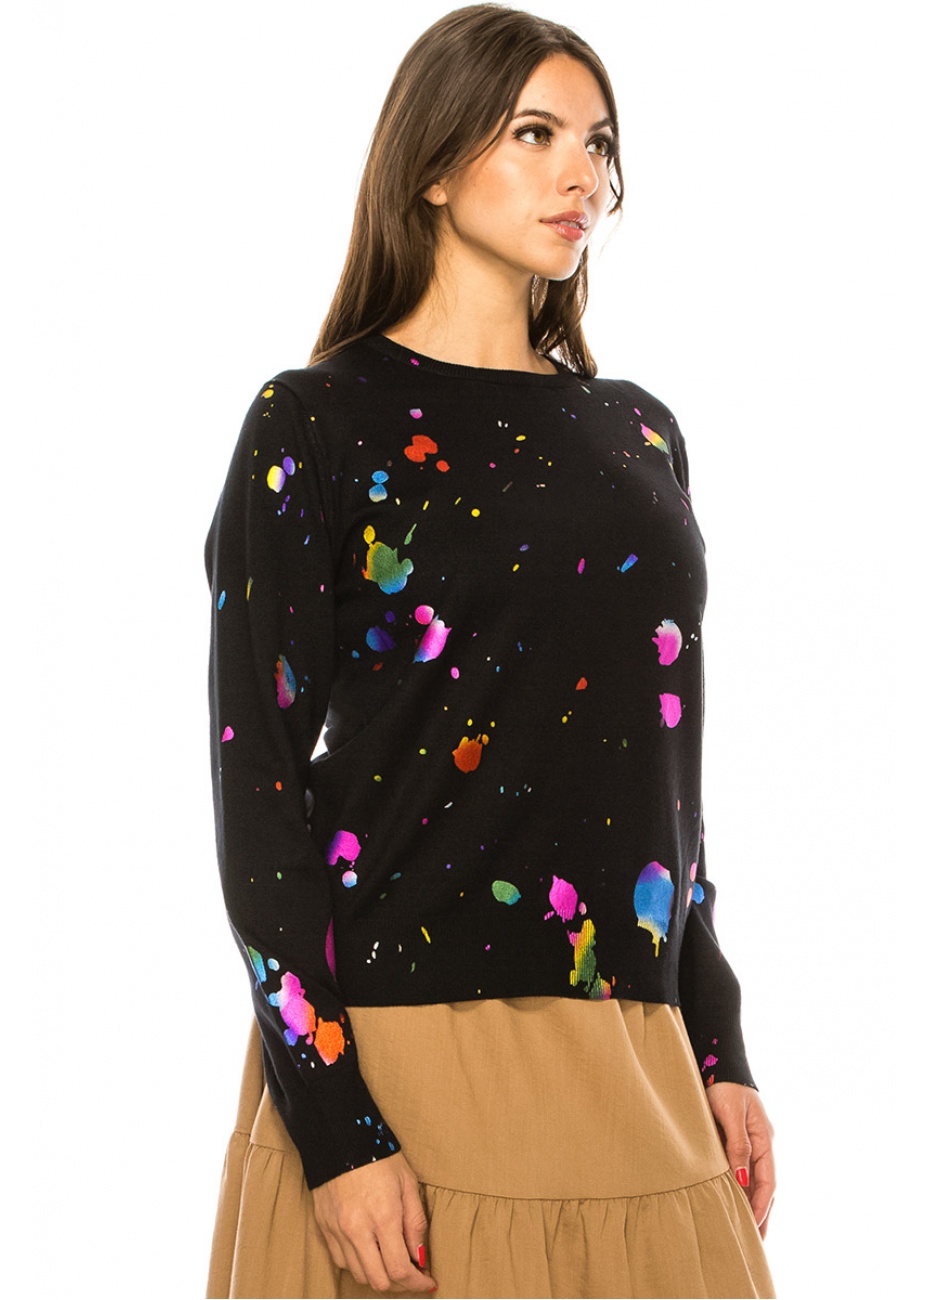 Black Knit Sweater With Multicolored Spots